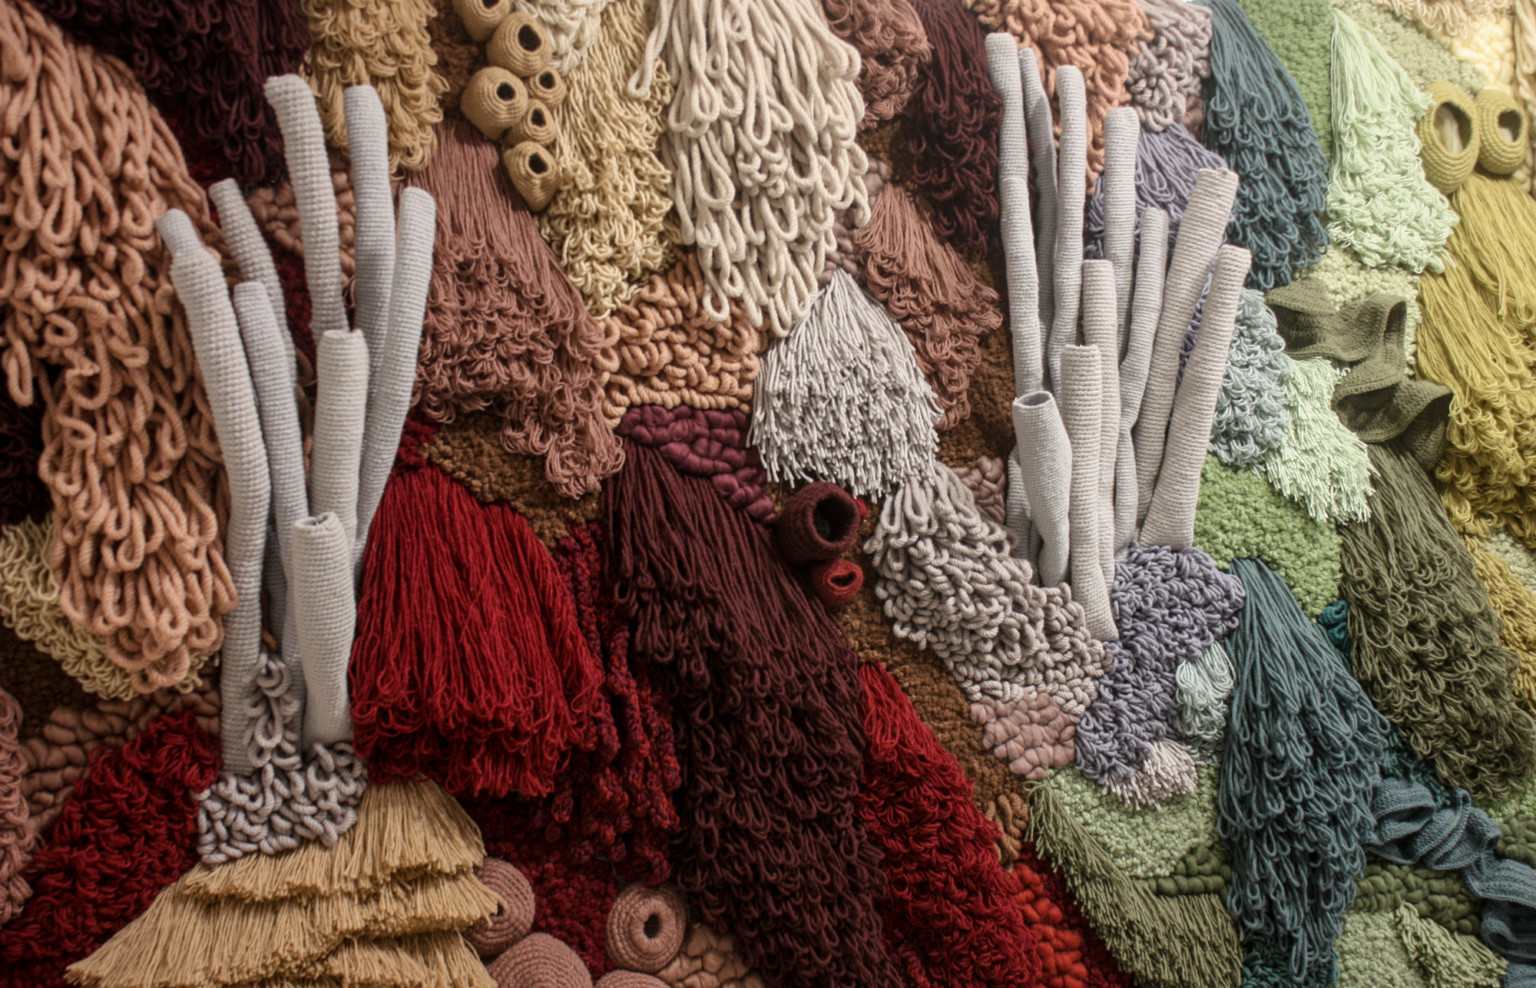 Stills from "Coral Garden," Vanessa Barragão's new art project made entirely from textile waste. 